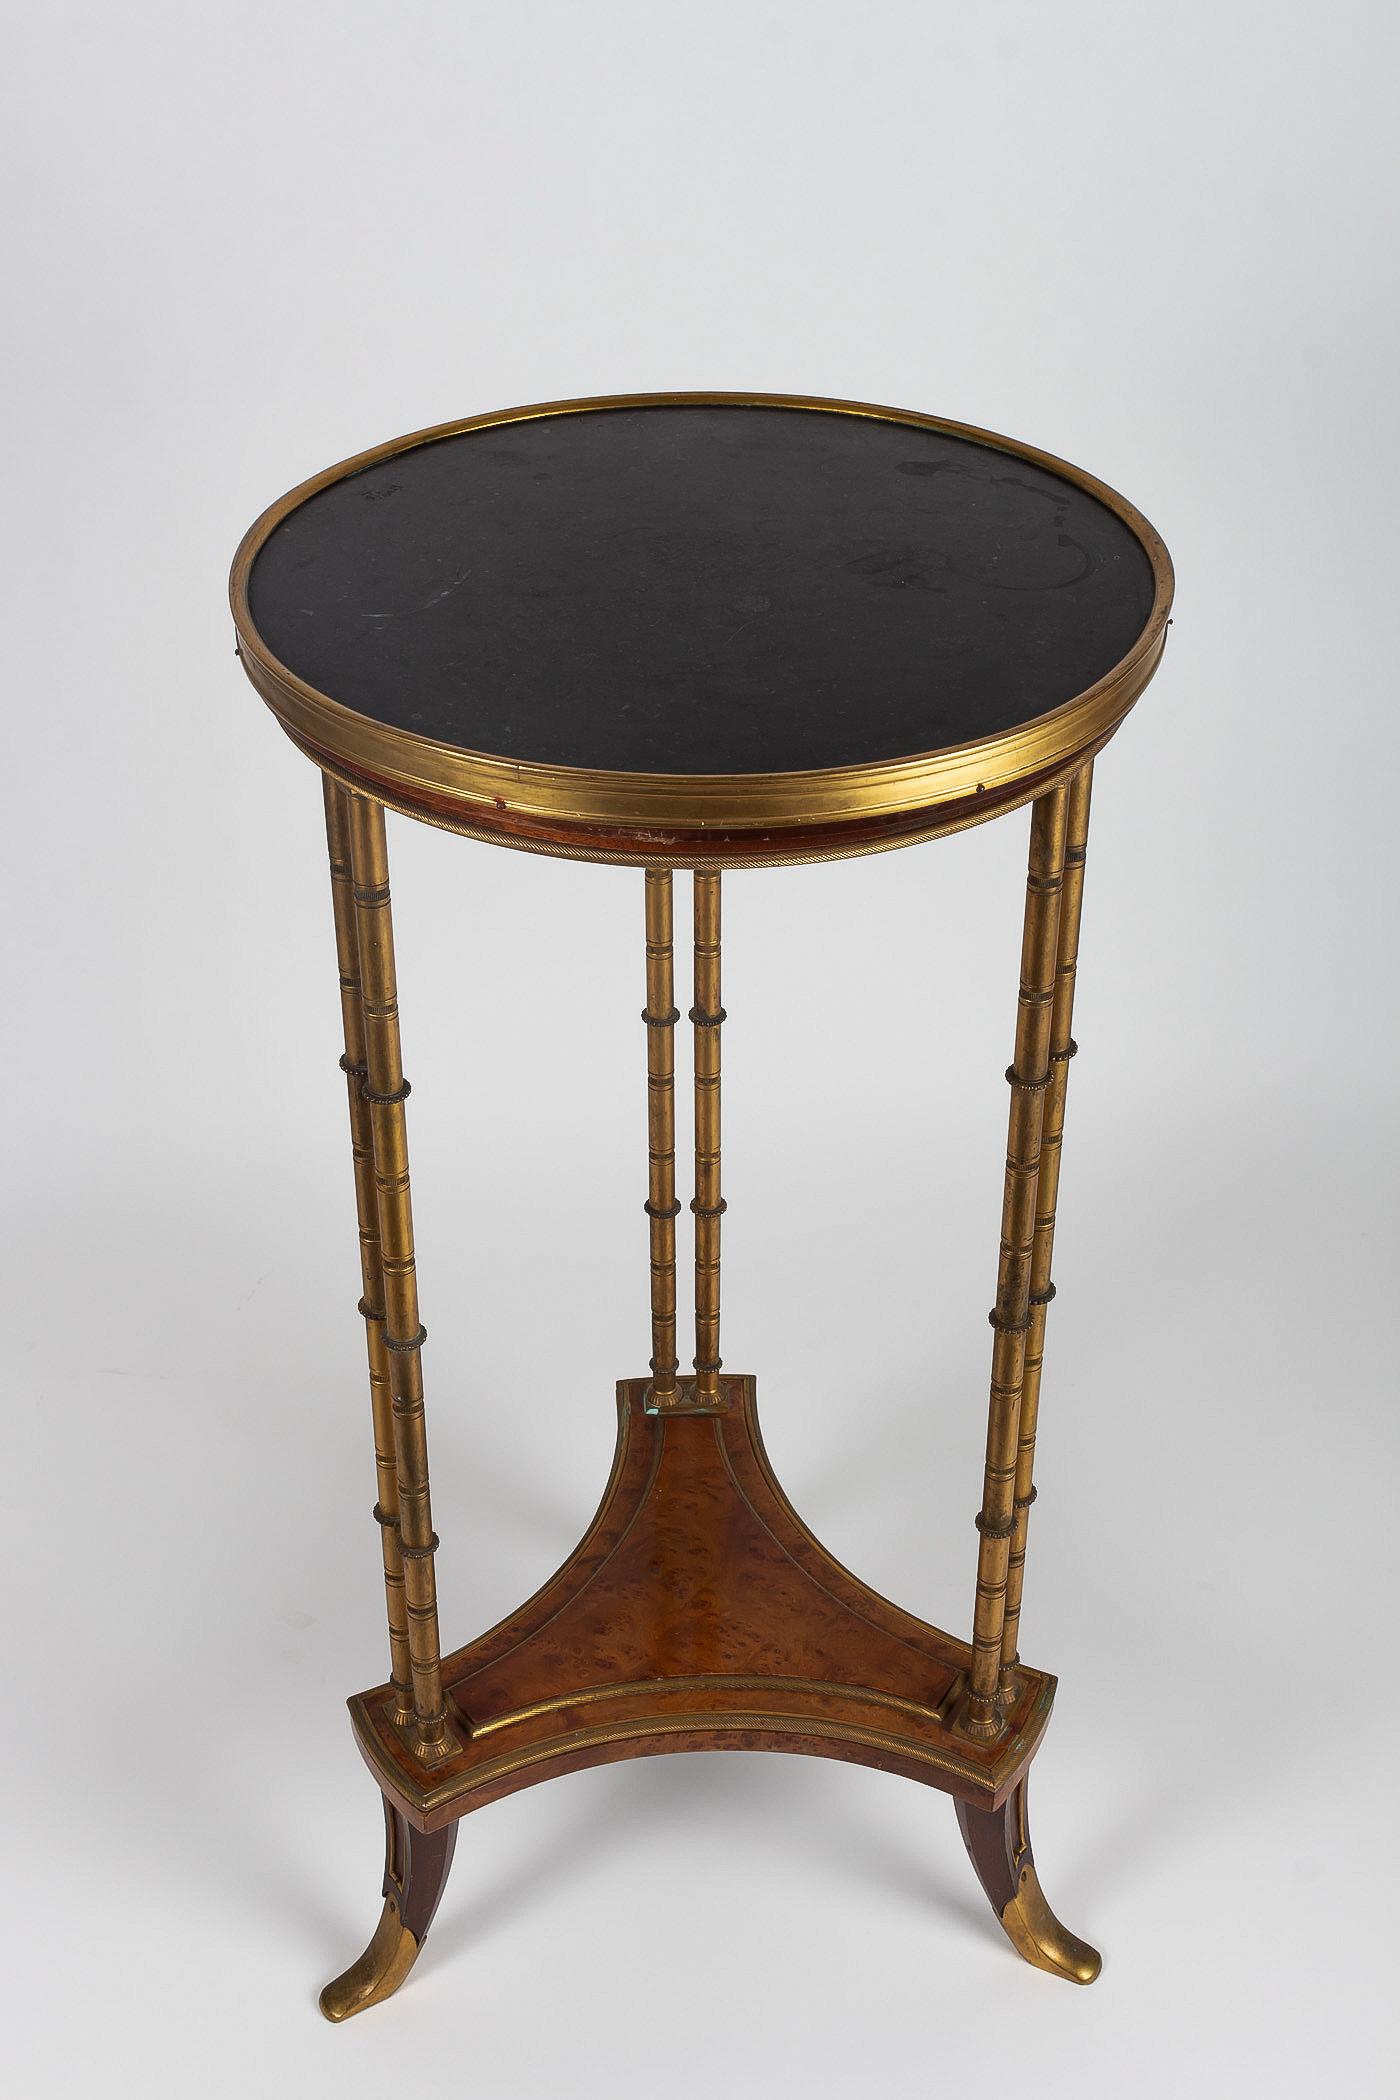 French Late 19th Century Gueridon Table in the Style of Adam Weisweiler